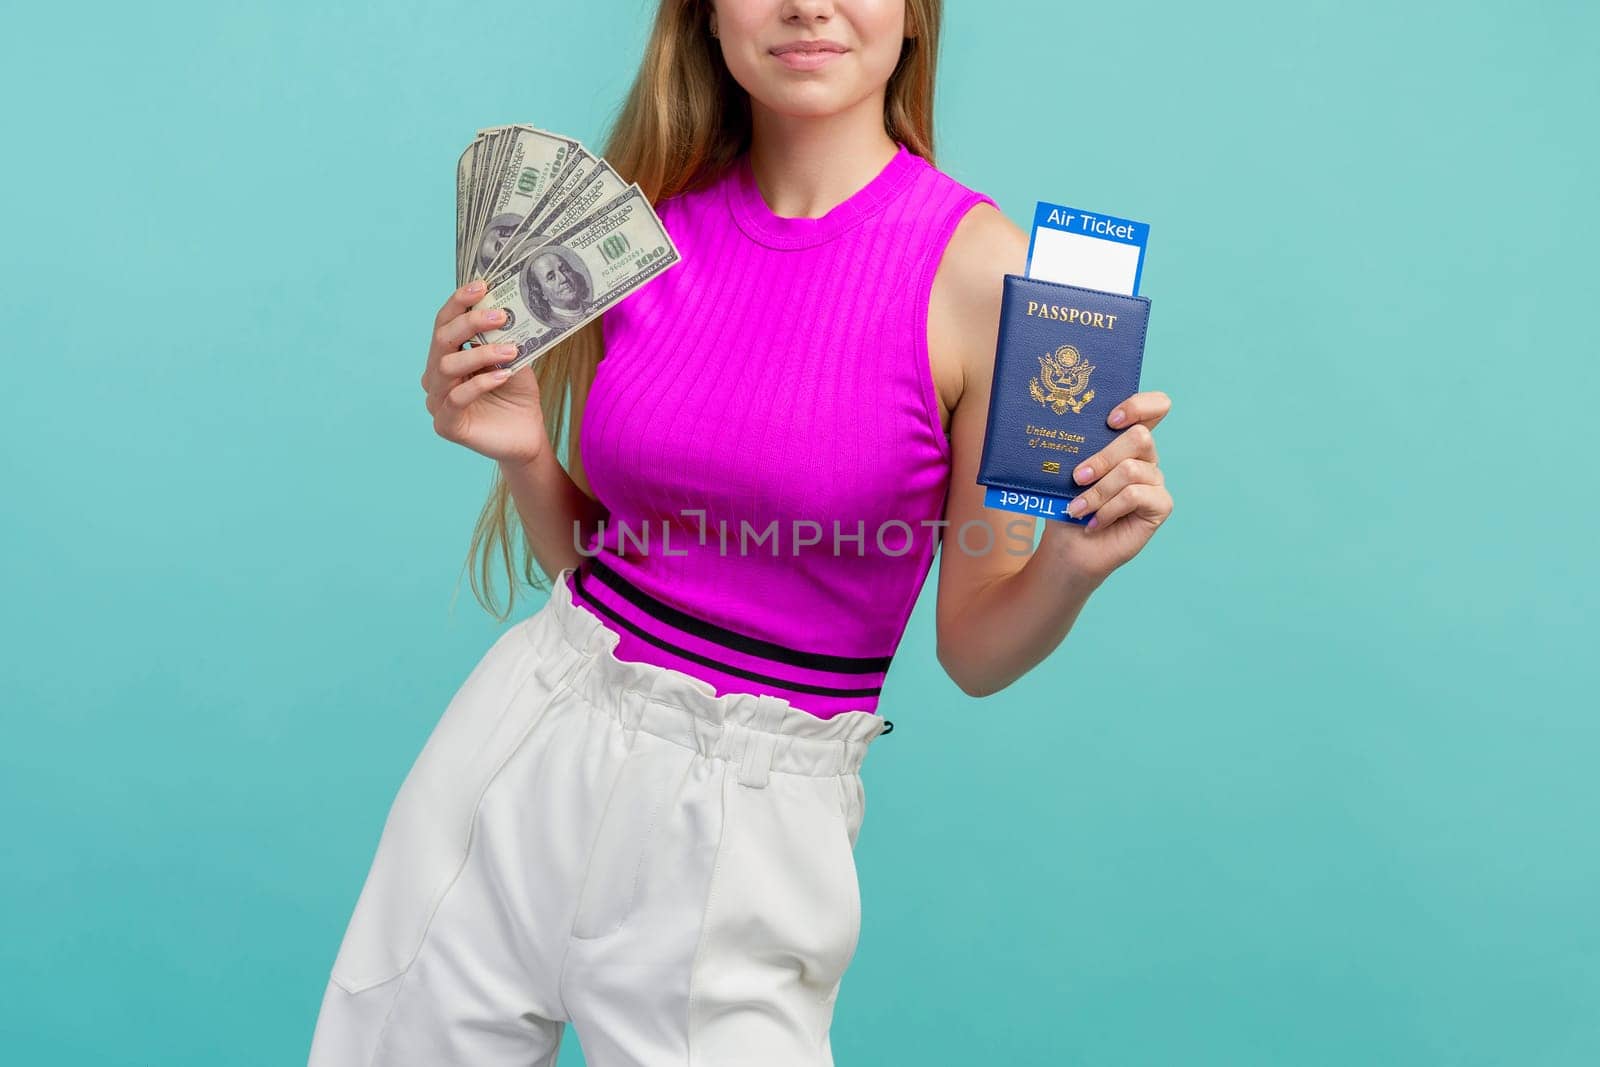 Studio portrait of pretty young student woman holding passport with tickets and money. Isolated on bright blue background.